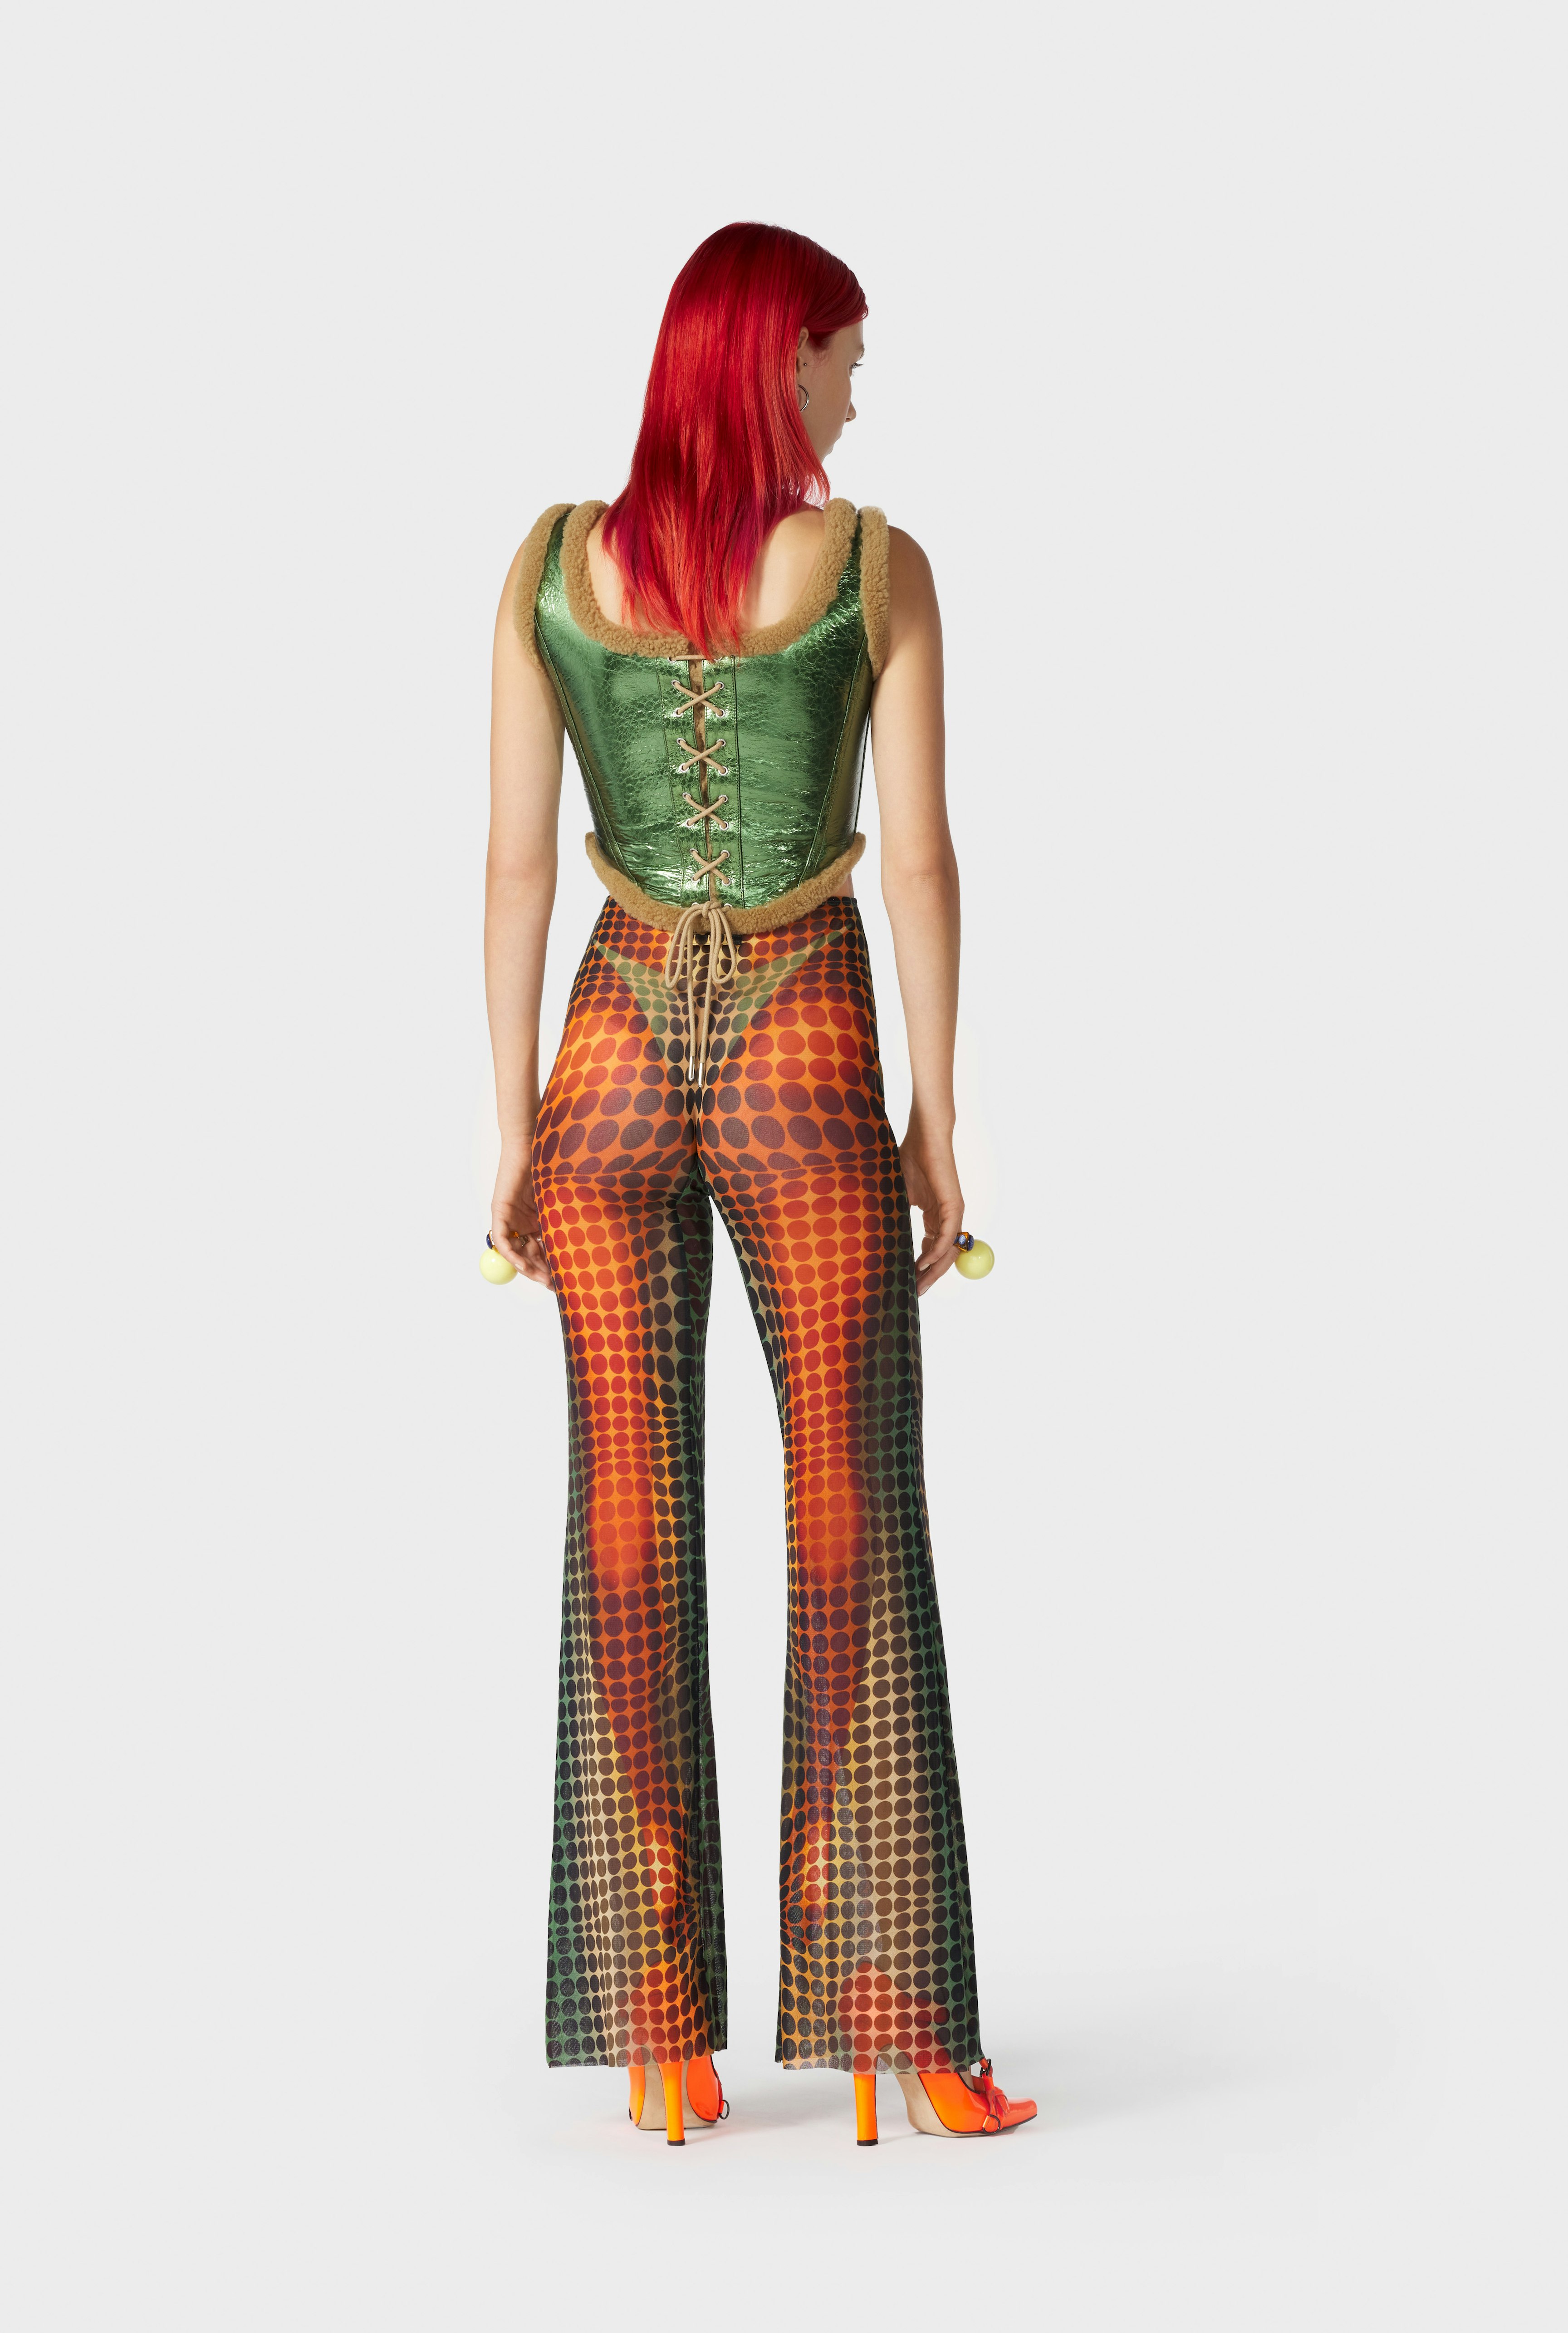 The Laminated Green Corset Jean Paul Gaultier